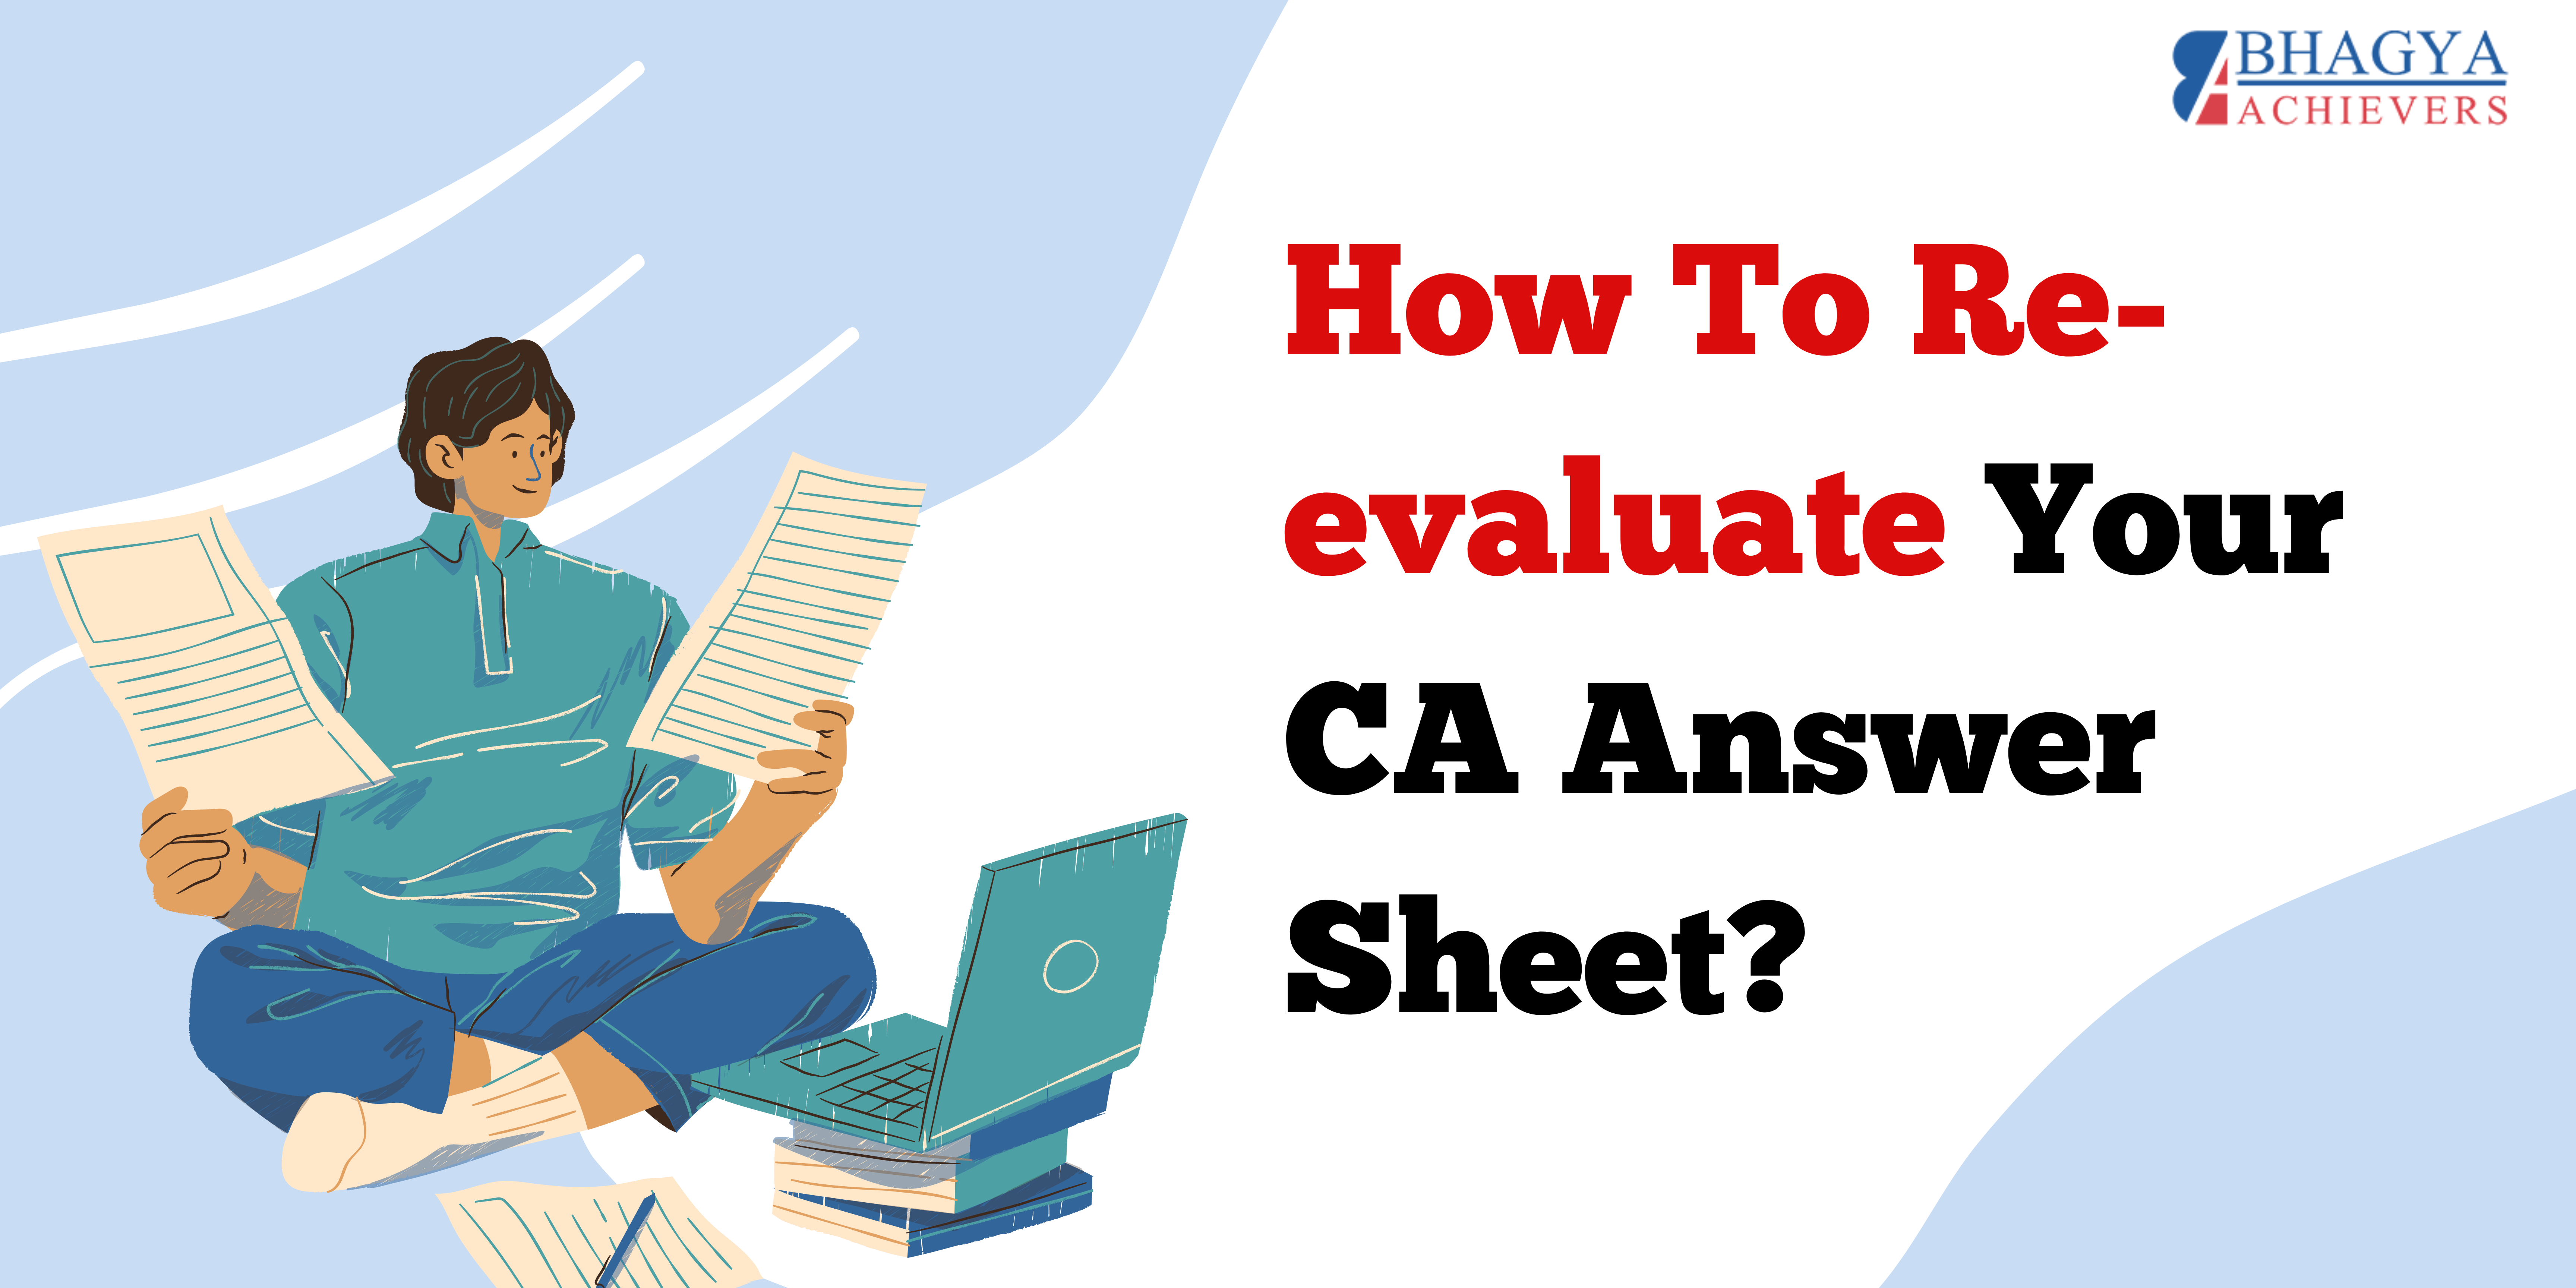 How to Re-evaluate your CA answer sheet? - Bhagya Achievers